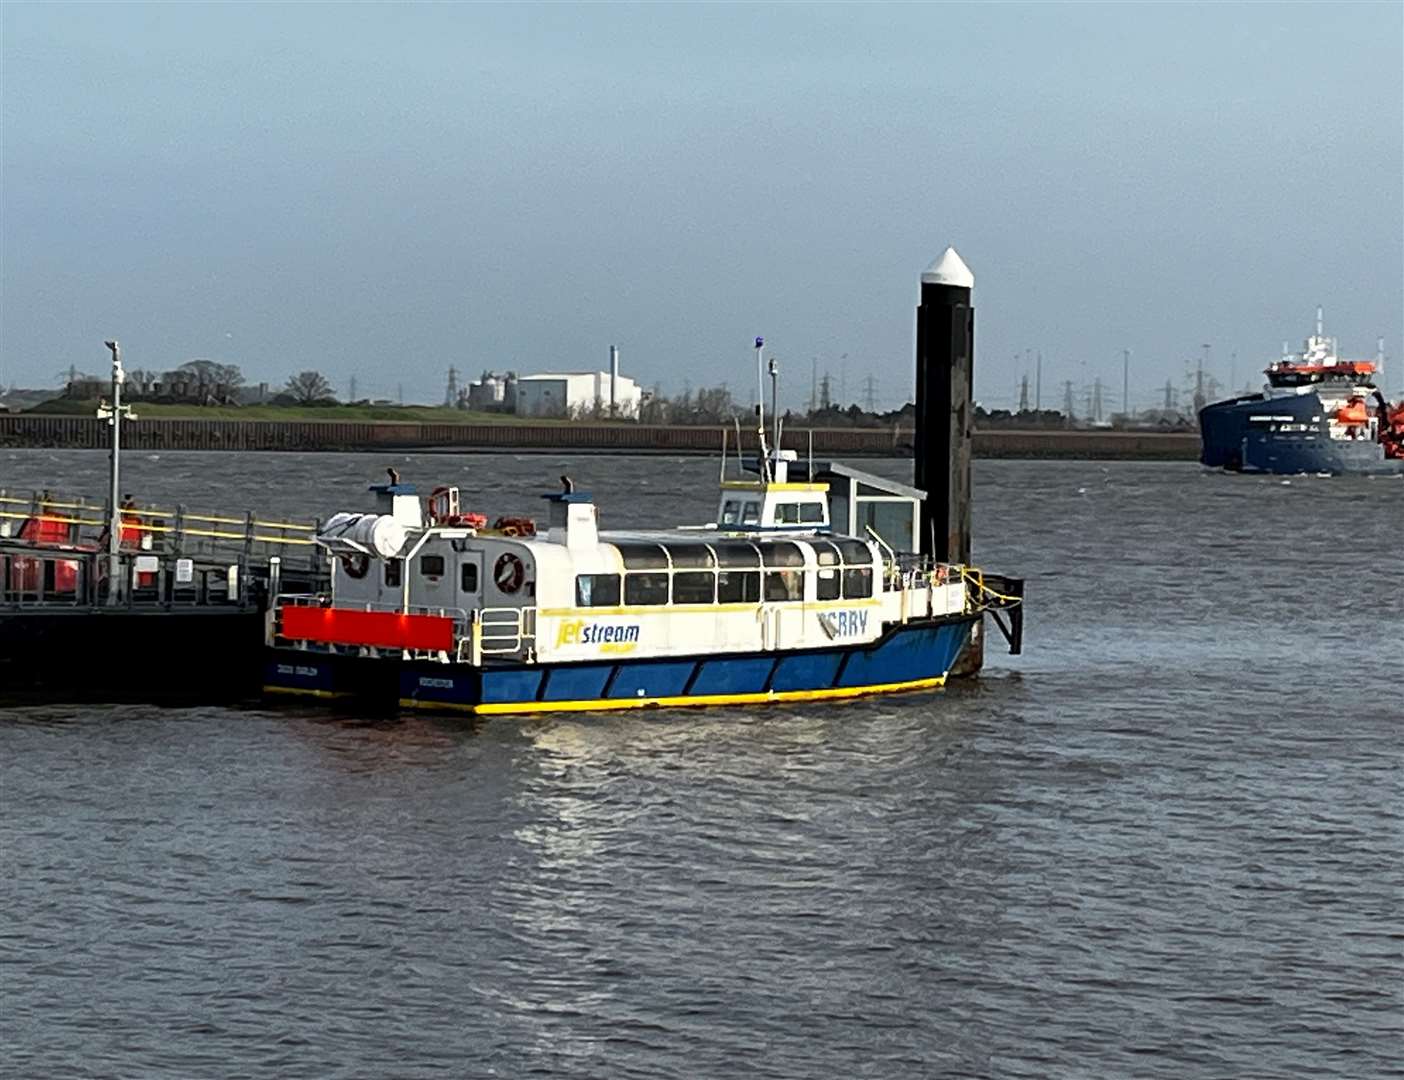 The Tilbury Ferry will stop running at the end of March